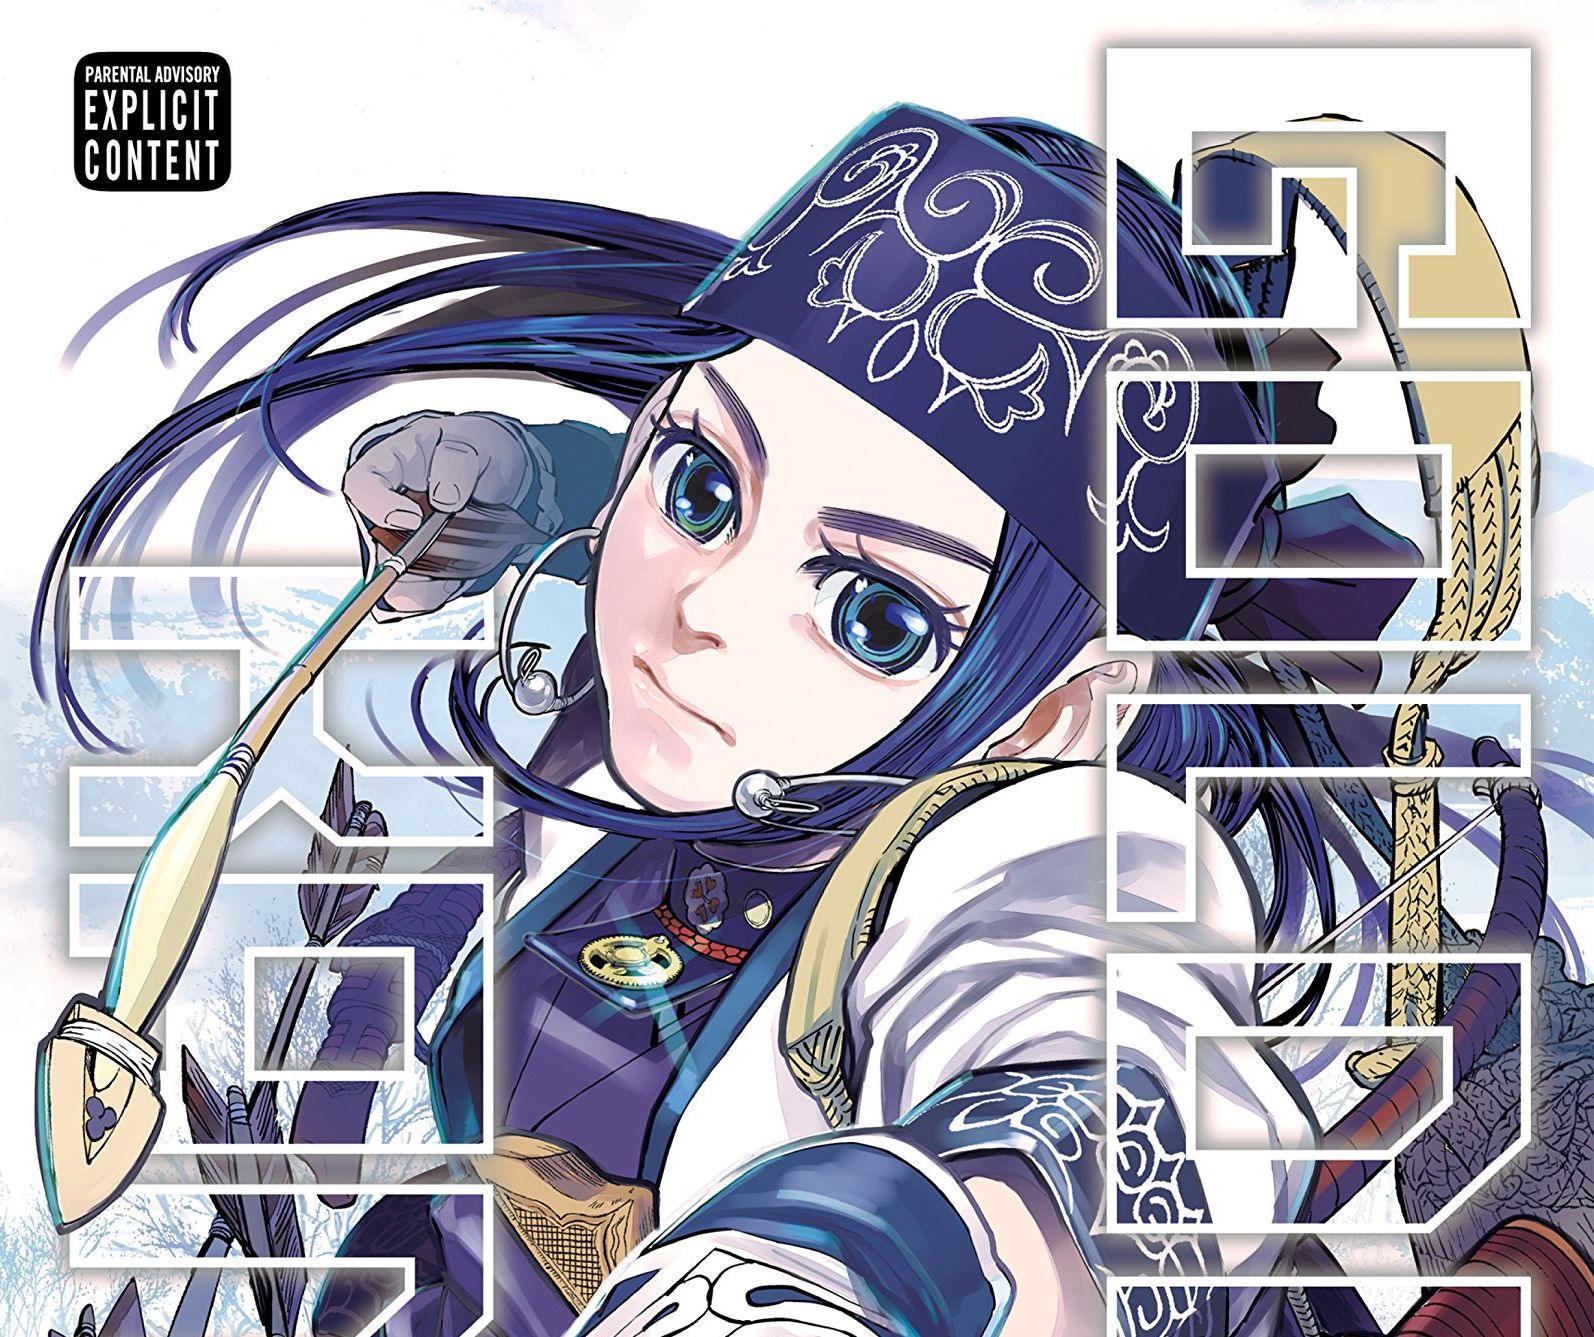 Golden Kamuy Vol. 11 Review